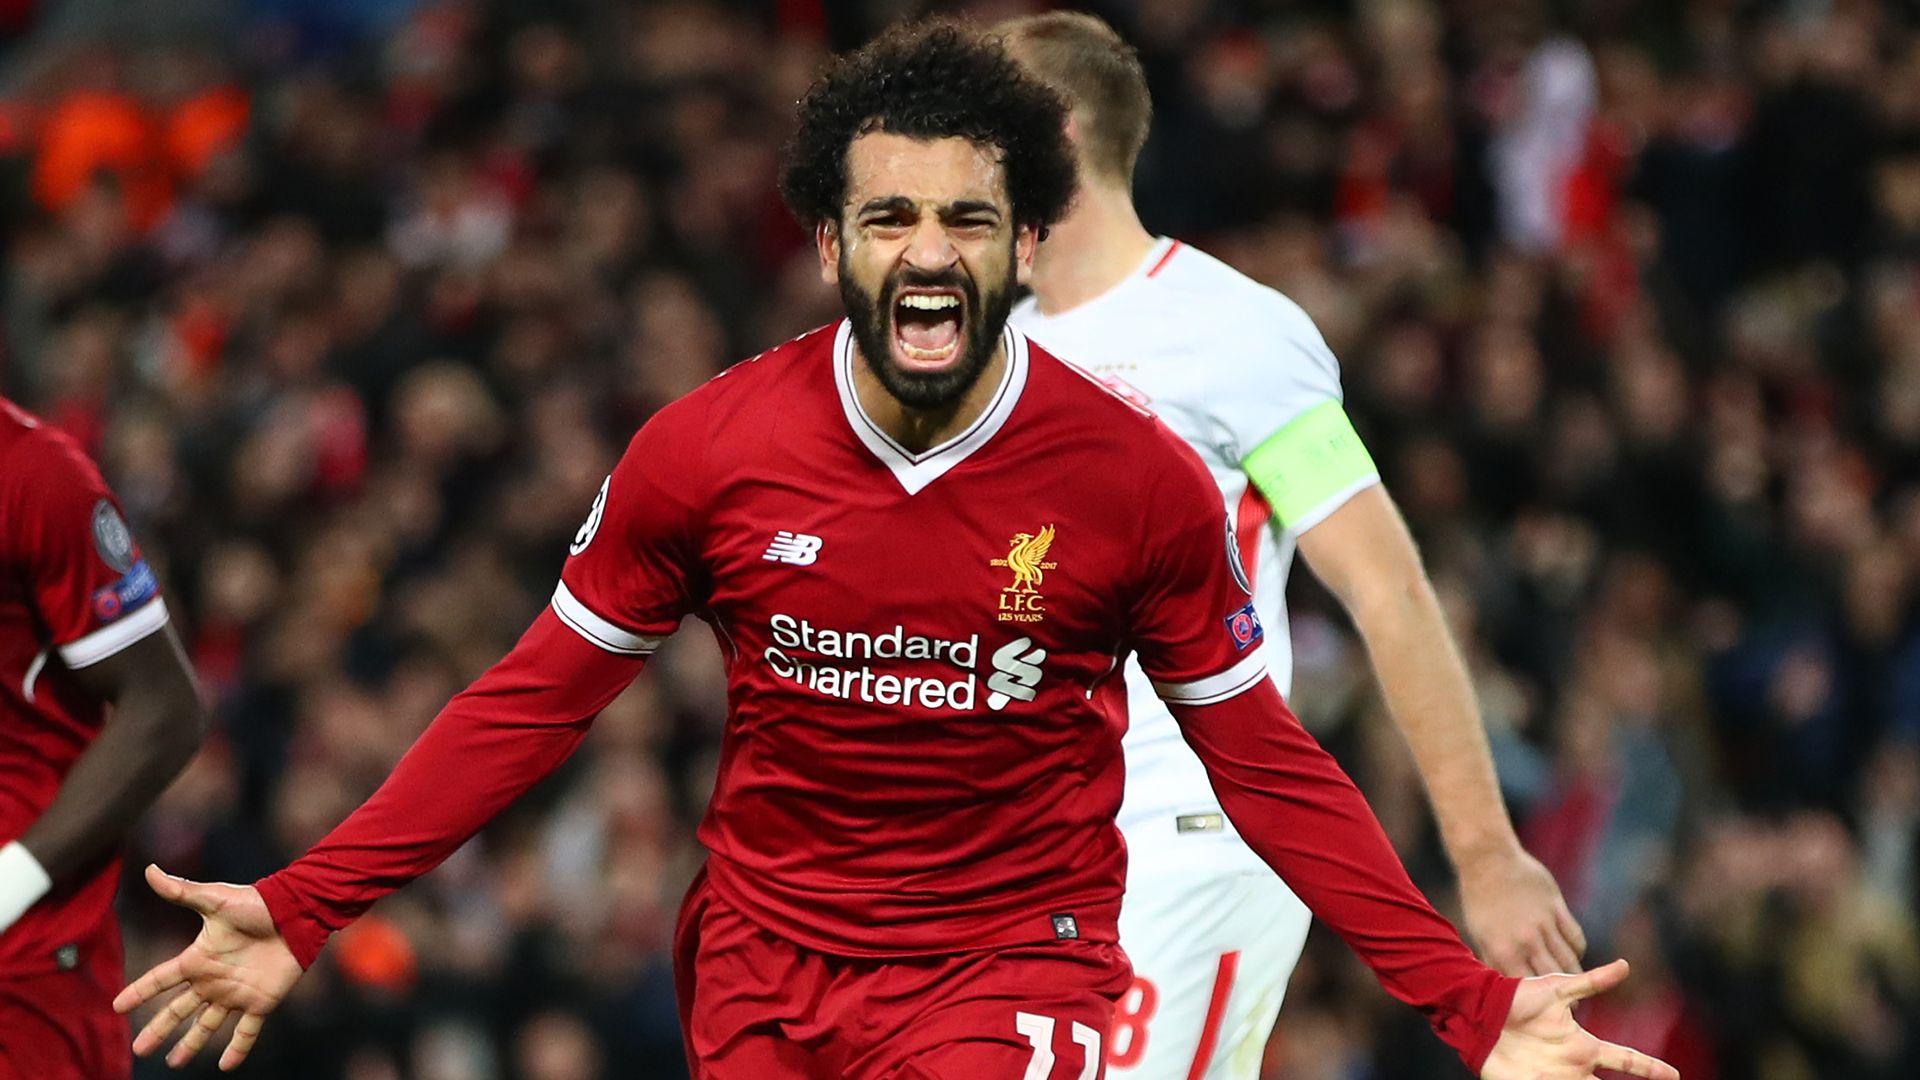 Mohamed Salah: My best Liverpool goals and 2018 silverware